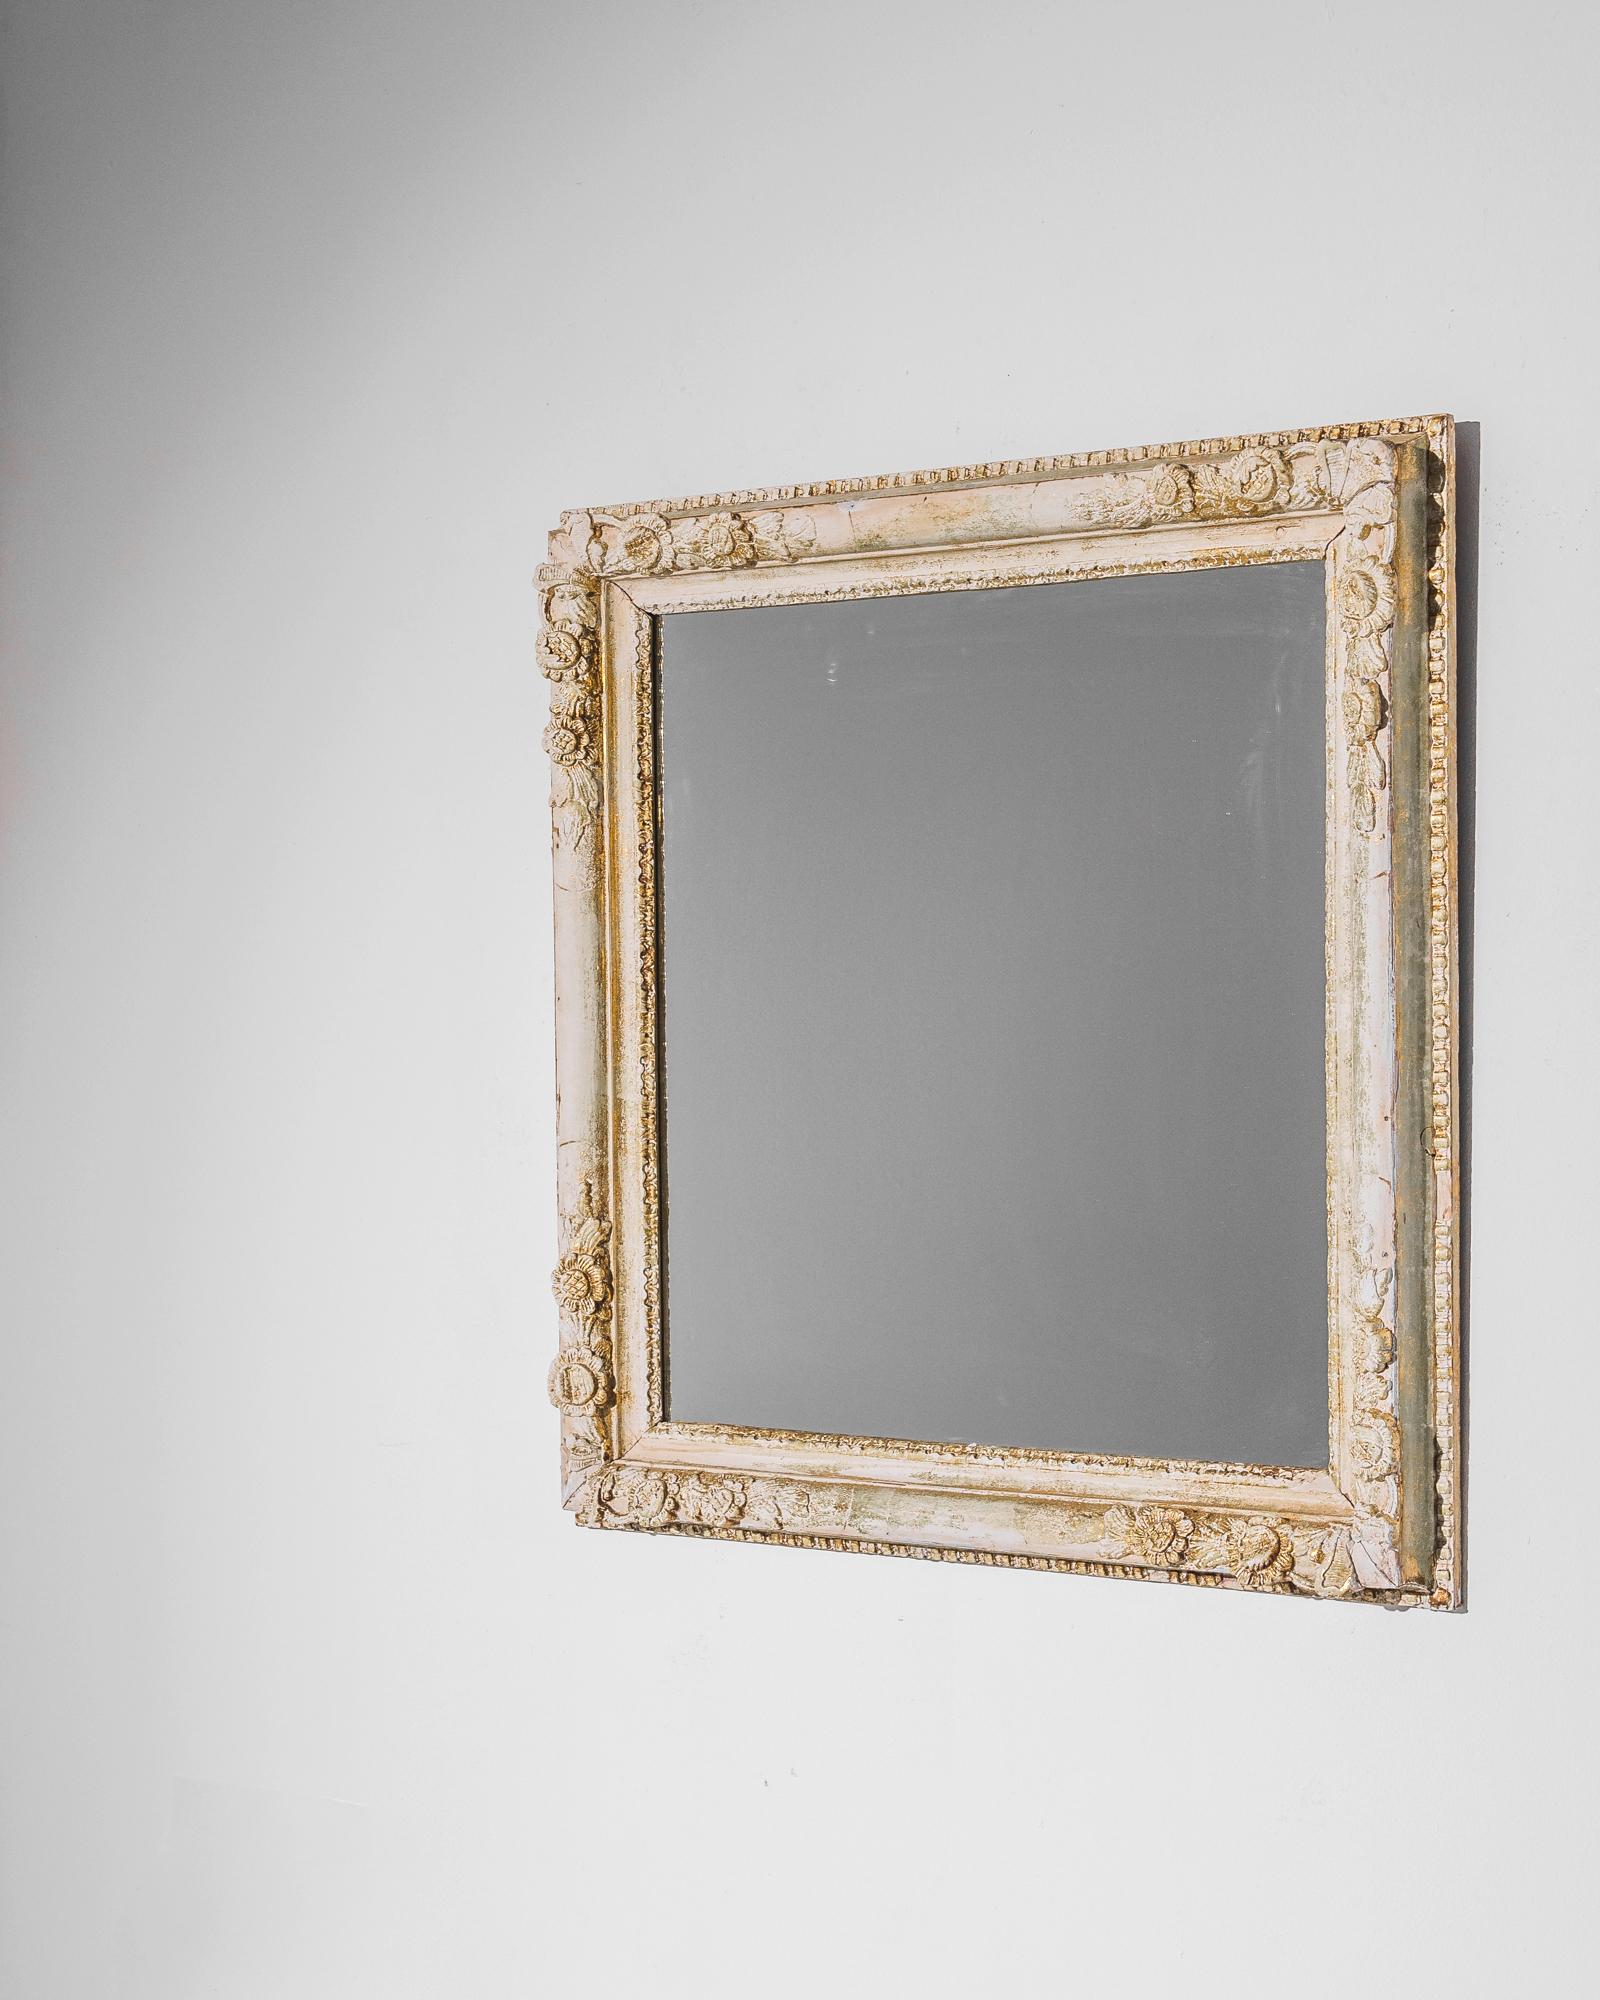 A wooden mirror produced in France circa 1880. This gilt, antique mirror, measuring 47 inches tall, features carved rosette and floral patterns around its deep frame. As a looking glass framed in glittering gold and white, it is meant to be gazed